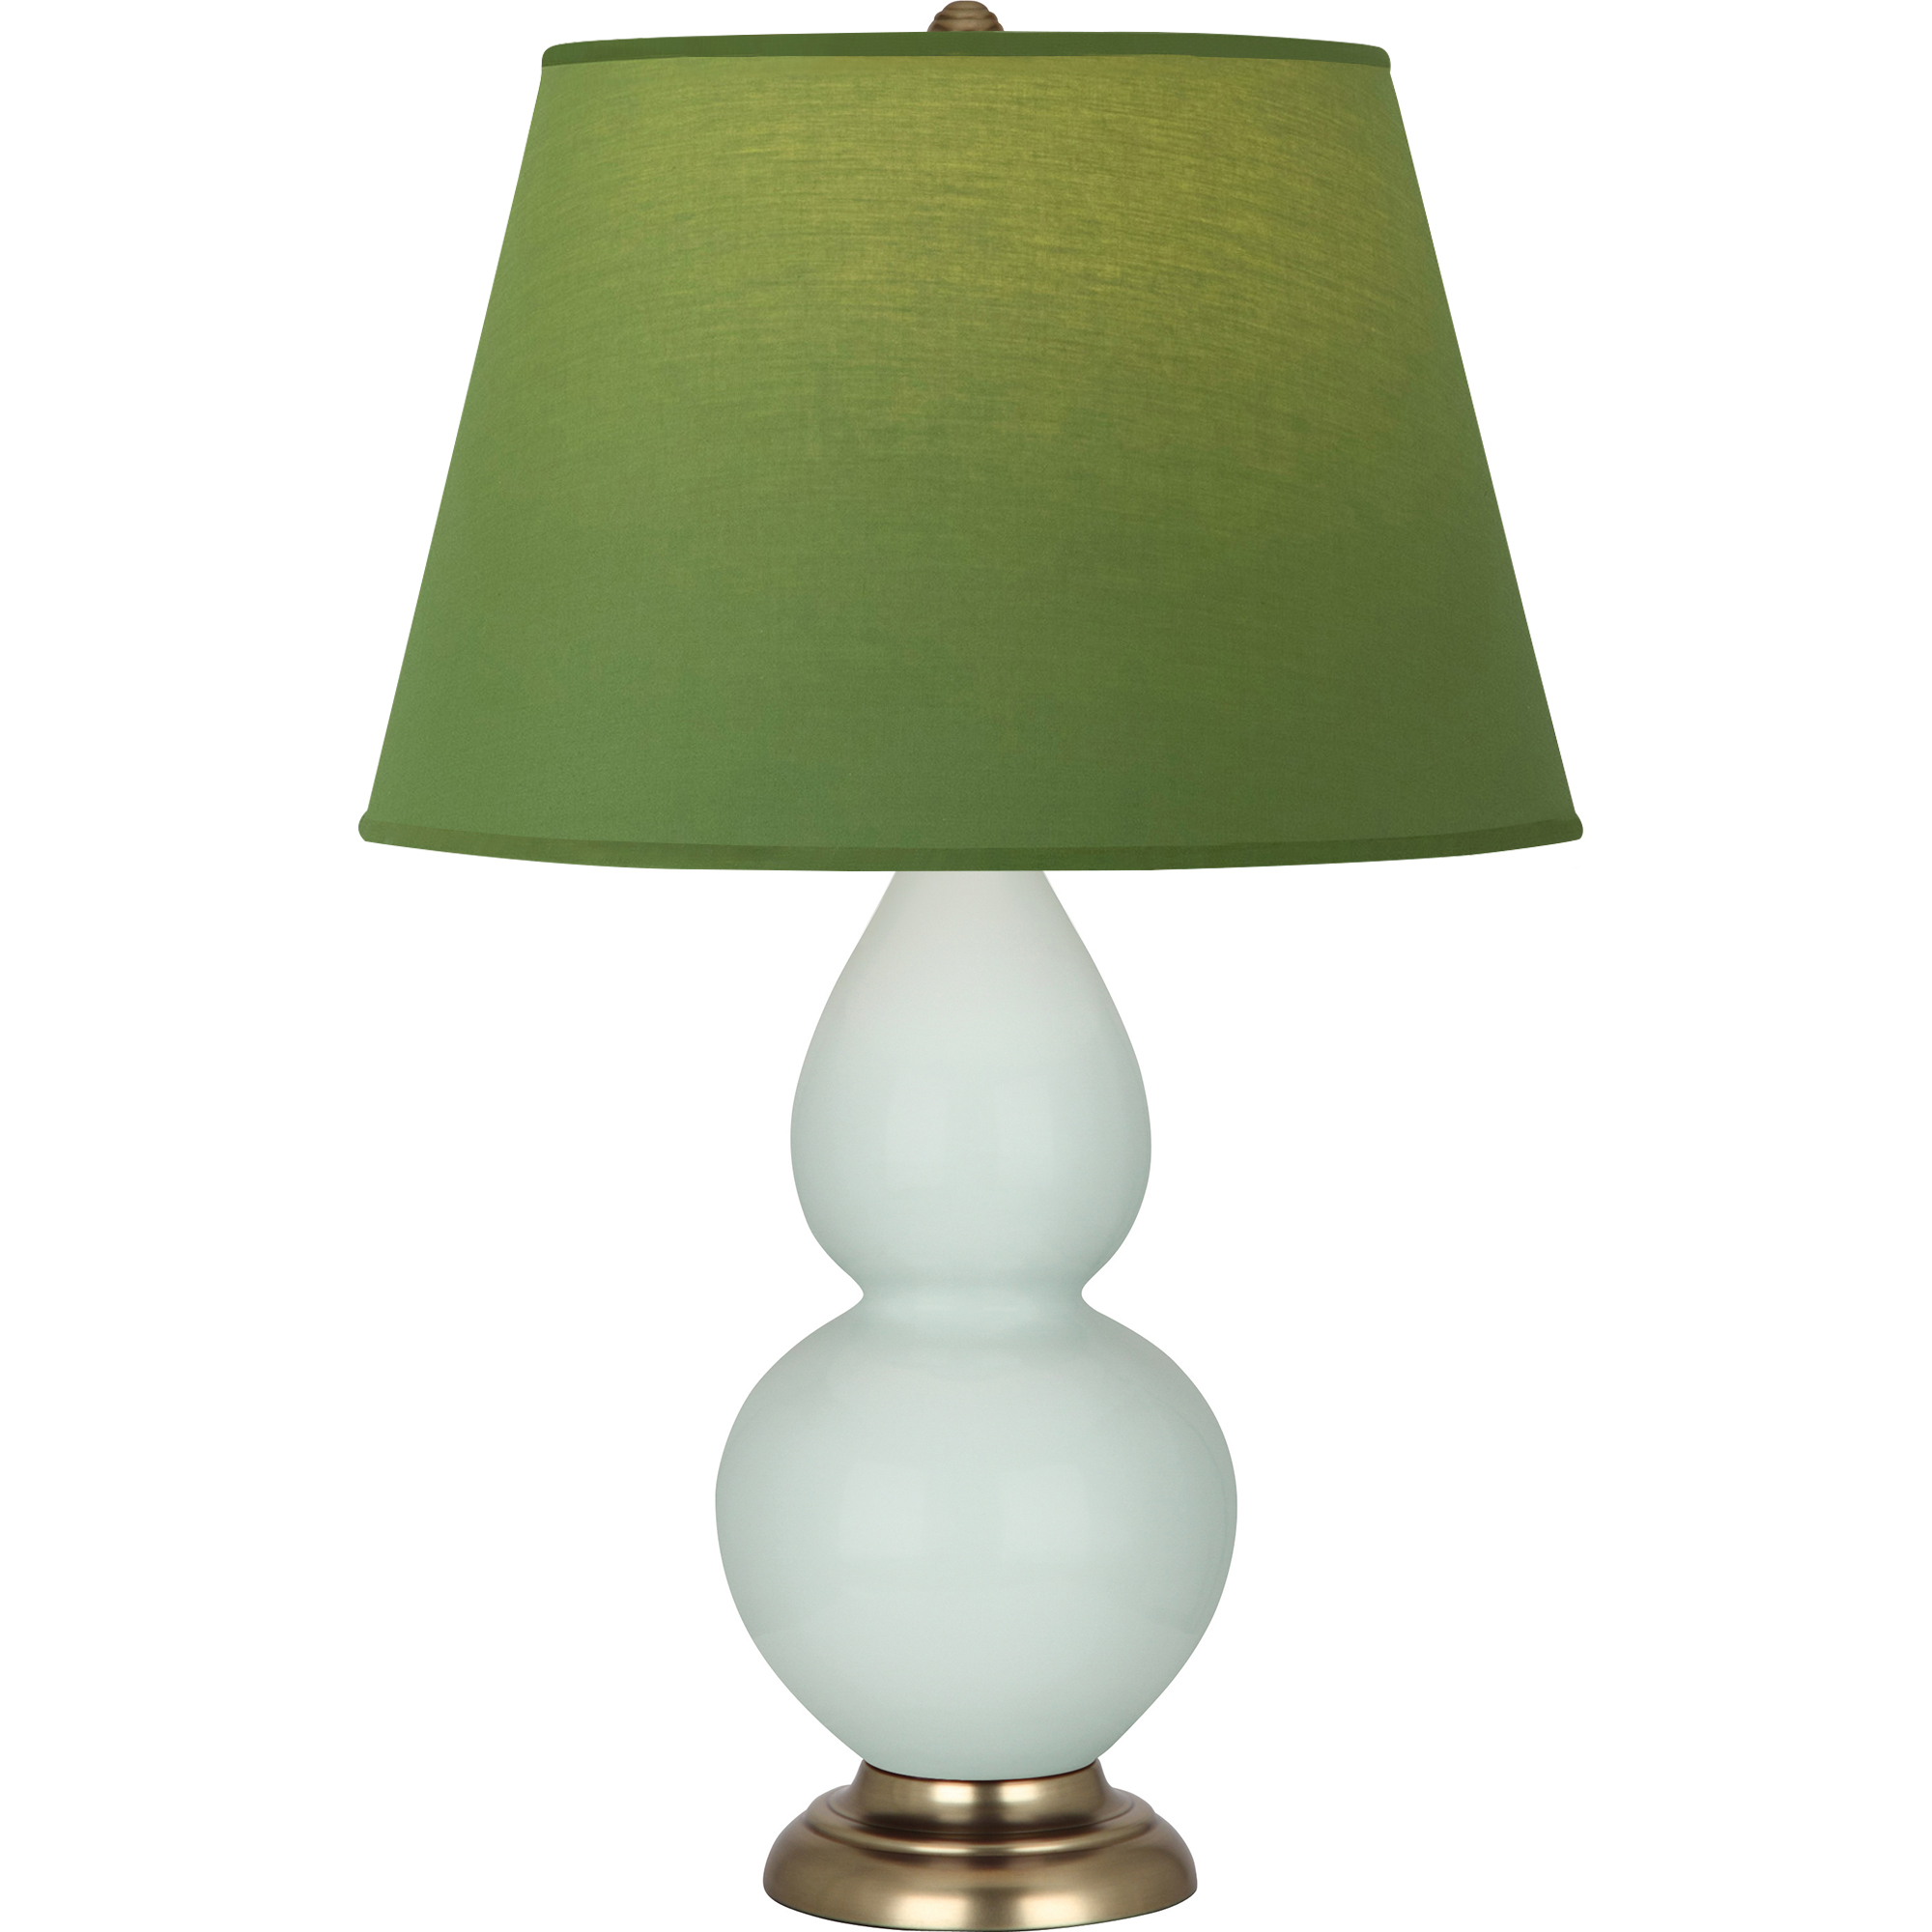 Double Gourd Table Lamp Style #1789G